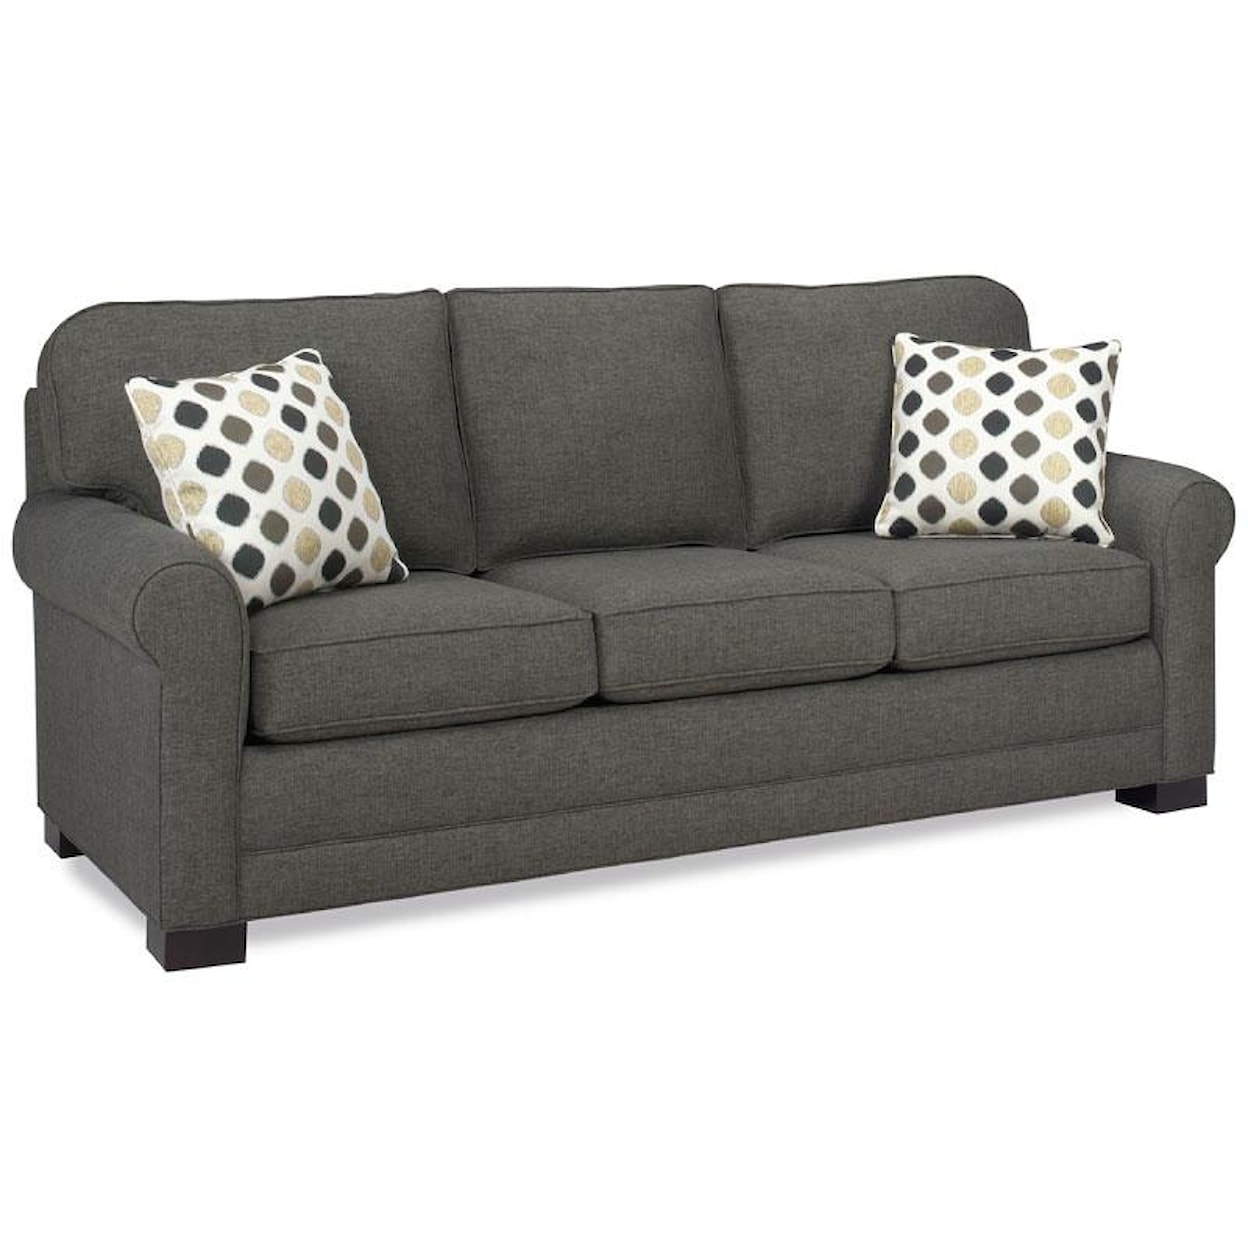 Temple Furniture Tailor Made Queen Sofa Sleeper